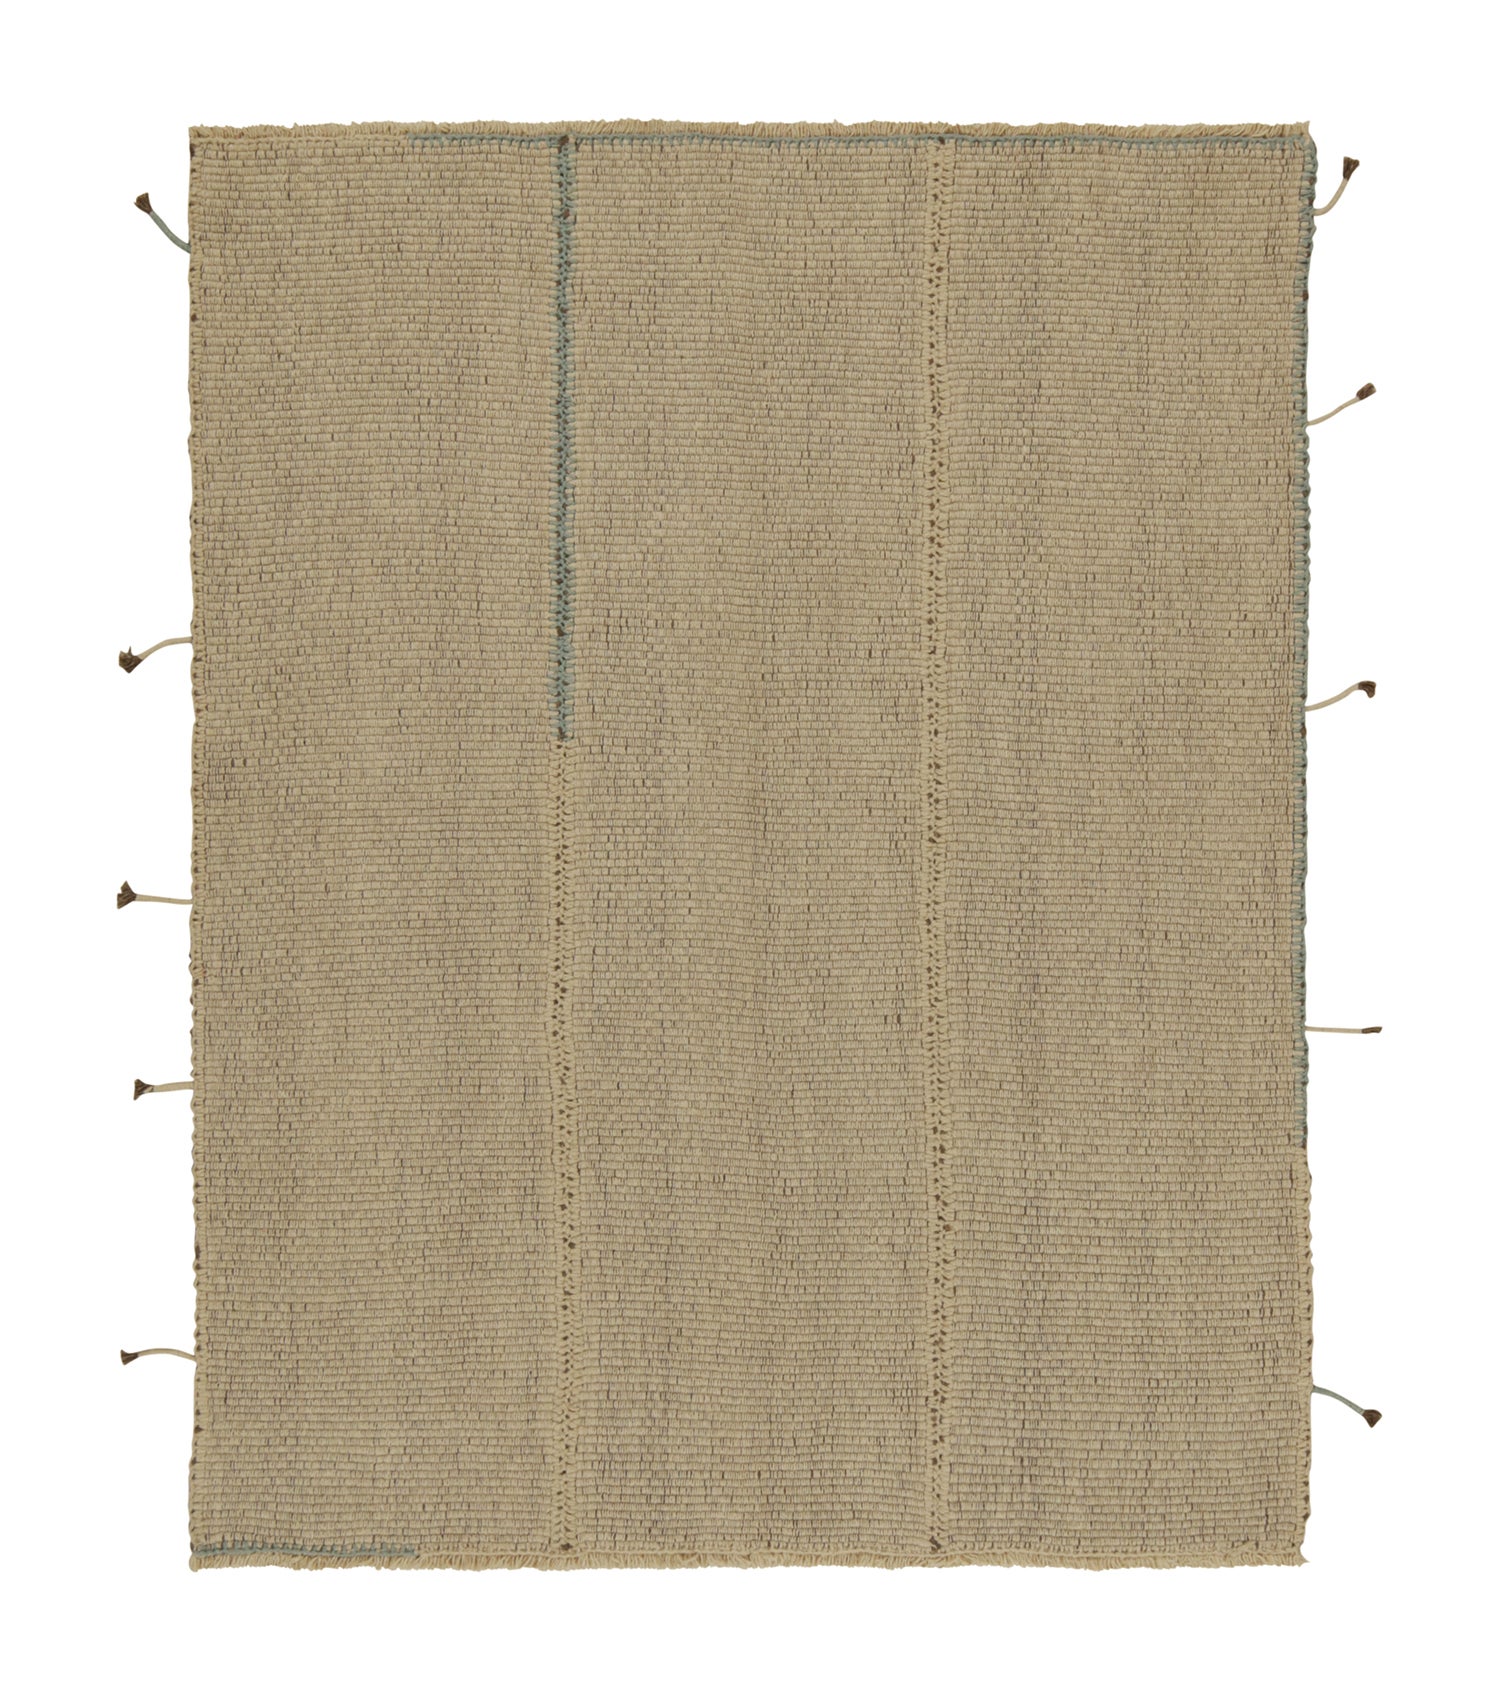 Rug & Kilim’s Contemporary Kilim in Beige with Blue Accents